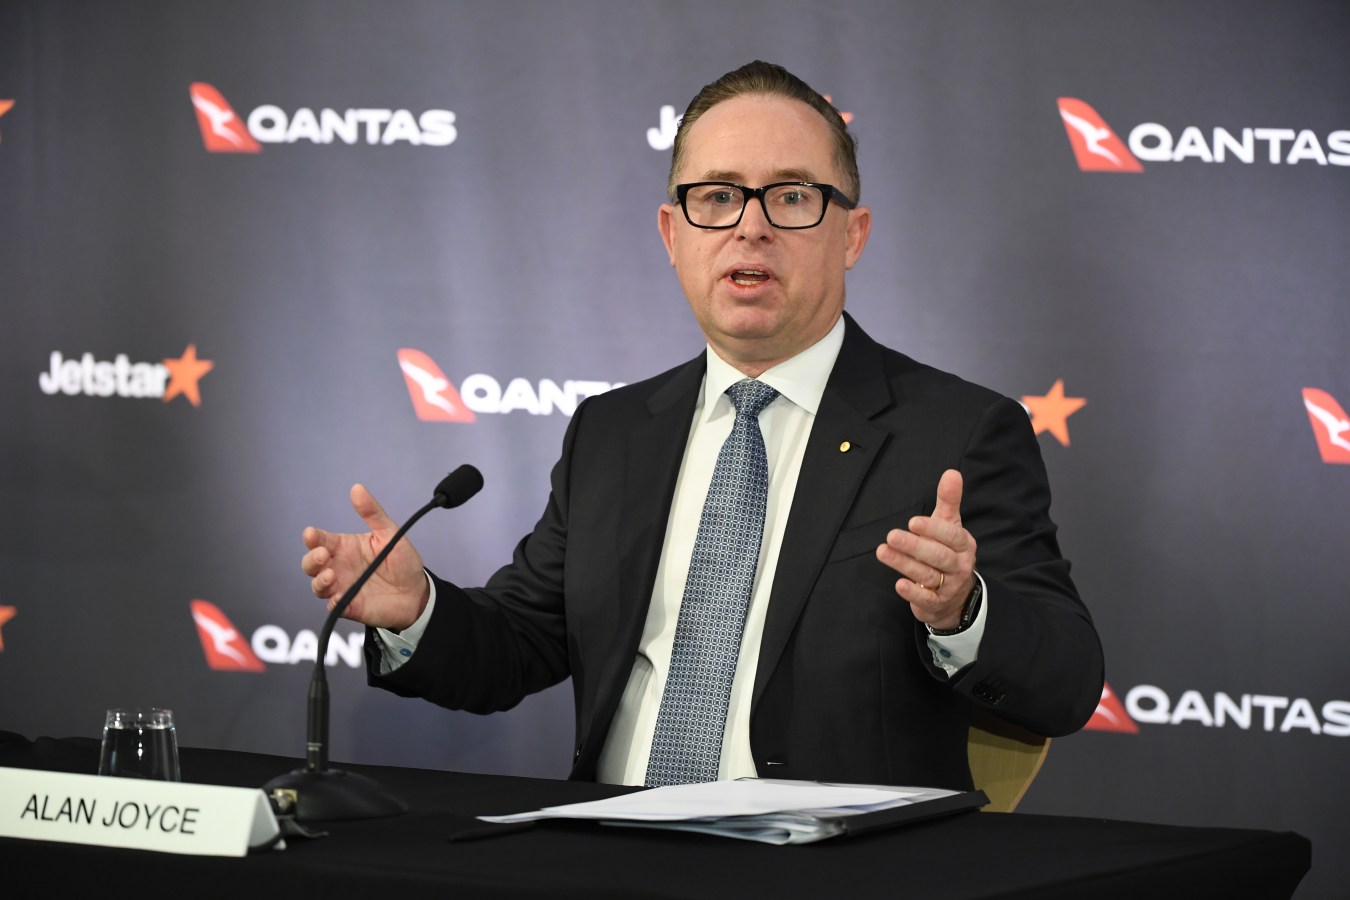 Qantas Group CEO Alan Joyce speaking at a press conference for the full year results announcement on August 25, 2022 in Sydney, Australia.